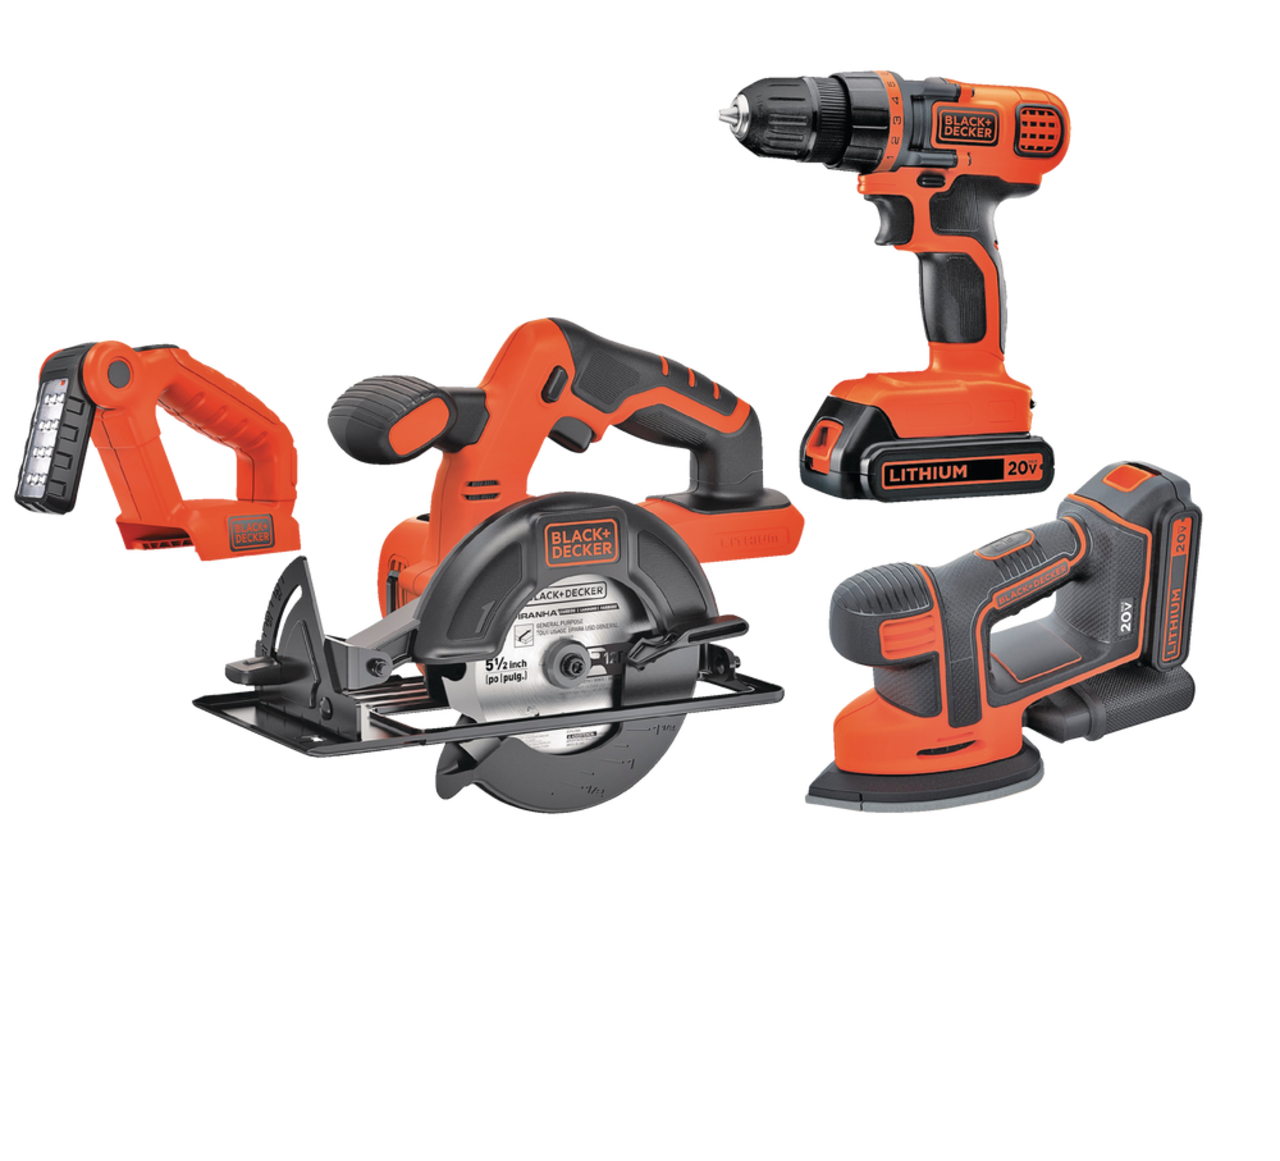 https://media-www.canadiantire.ca/product/fixing/tools/portable-power-tools/0547552/black-decker-20v-li-ion-4-tool-combo-kit-2edc5153-c9c6-4ac8-85d0-433fd1cb8671.png?imdensity=1&imwidth=640&impolicy=mZoom